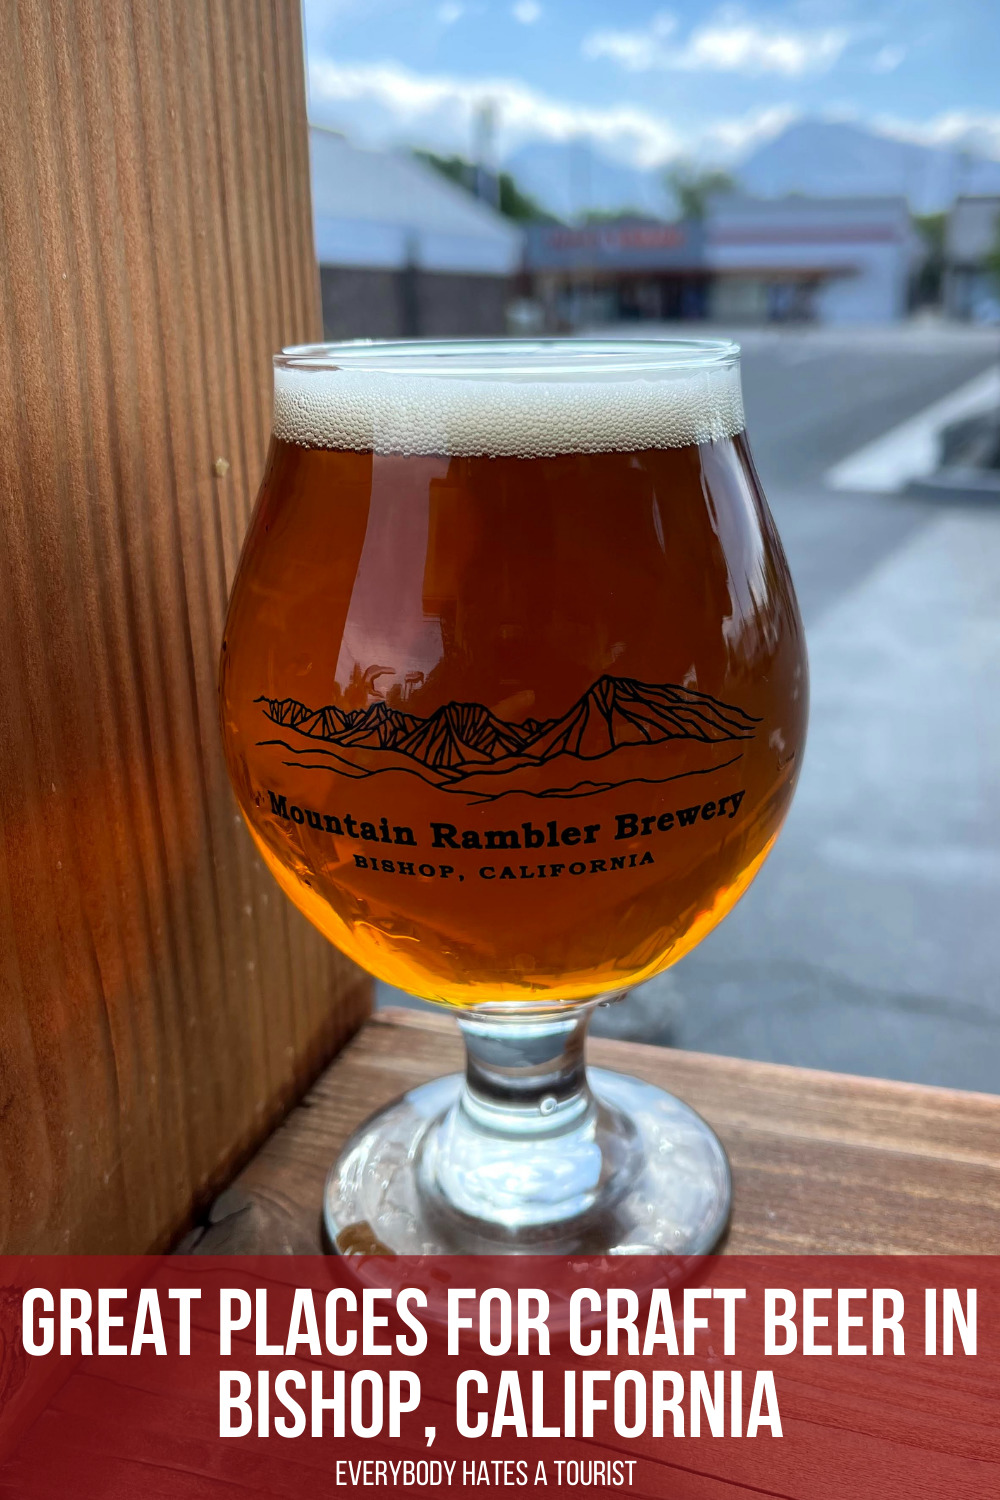 great places for craft beer in bishop california - 3 great places for craft beer in Bishop, California